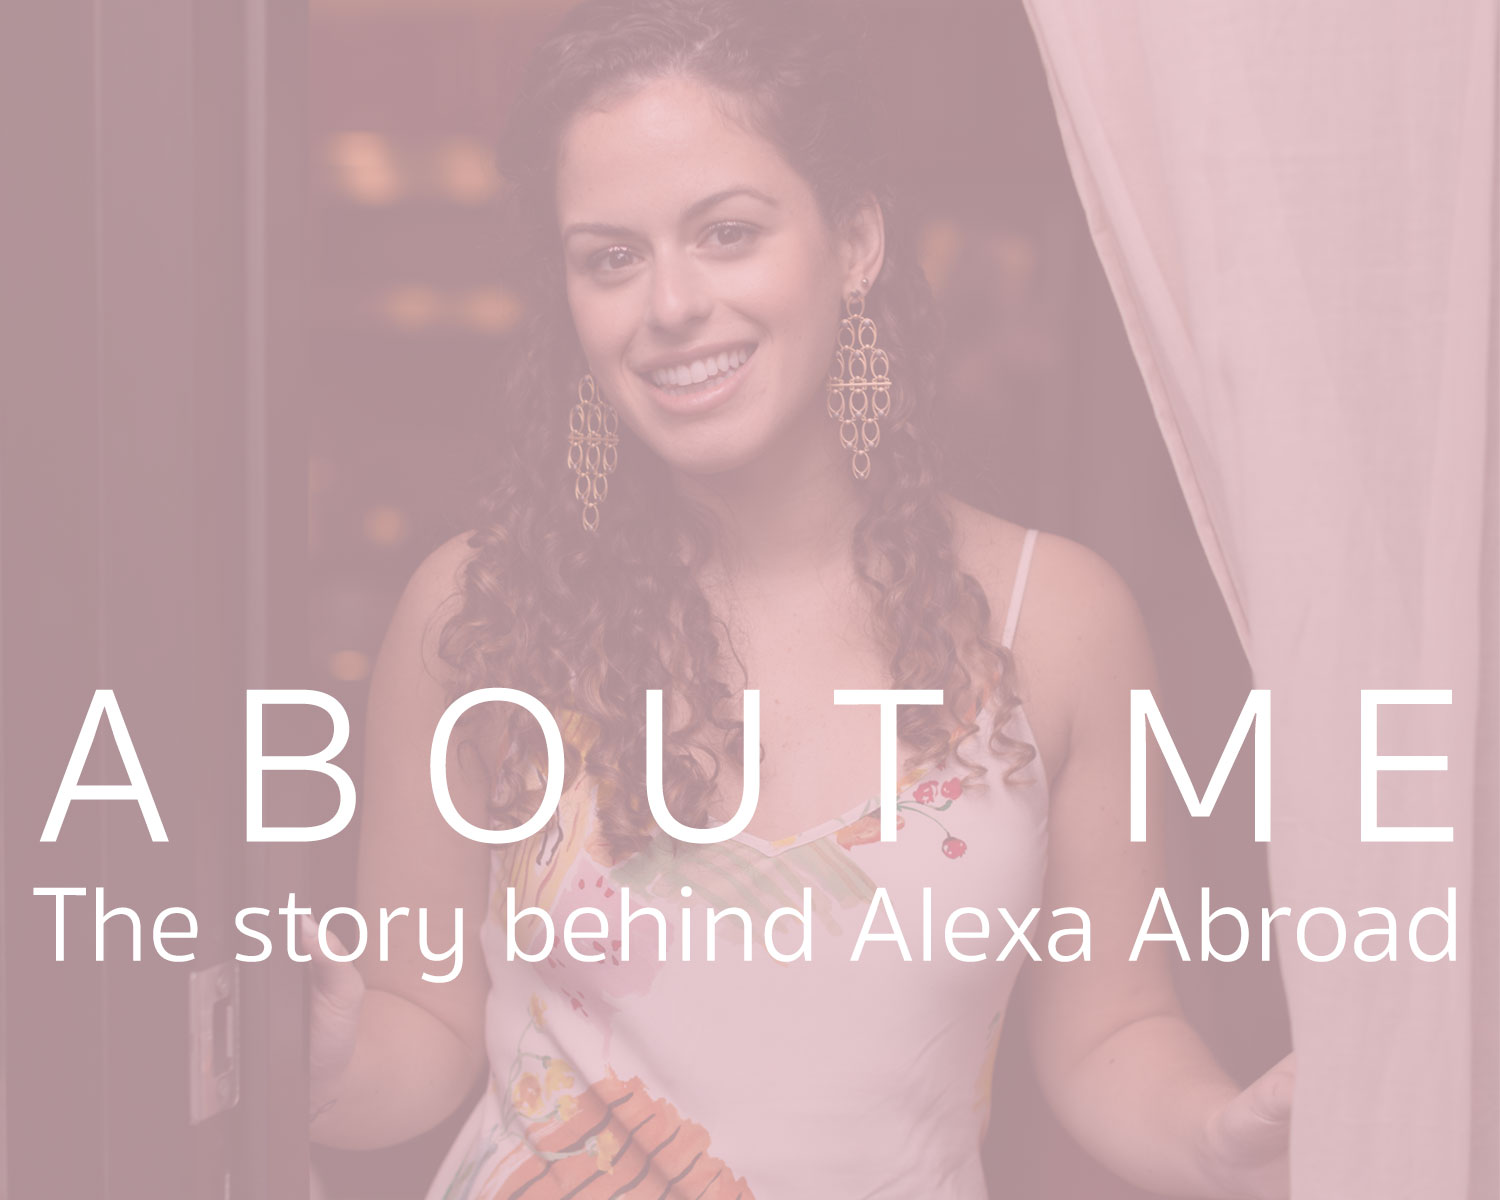 About me the story behind Alexa Abroad